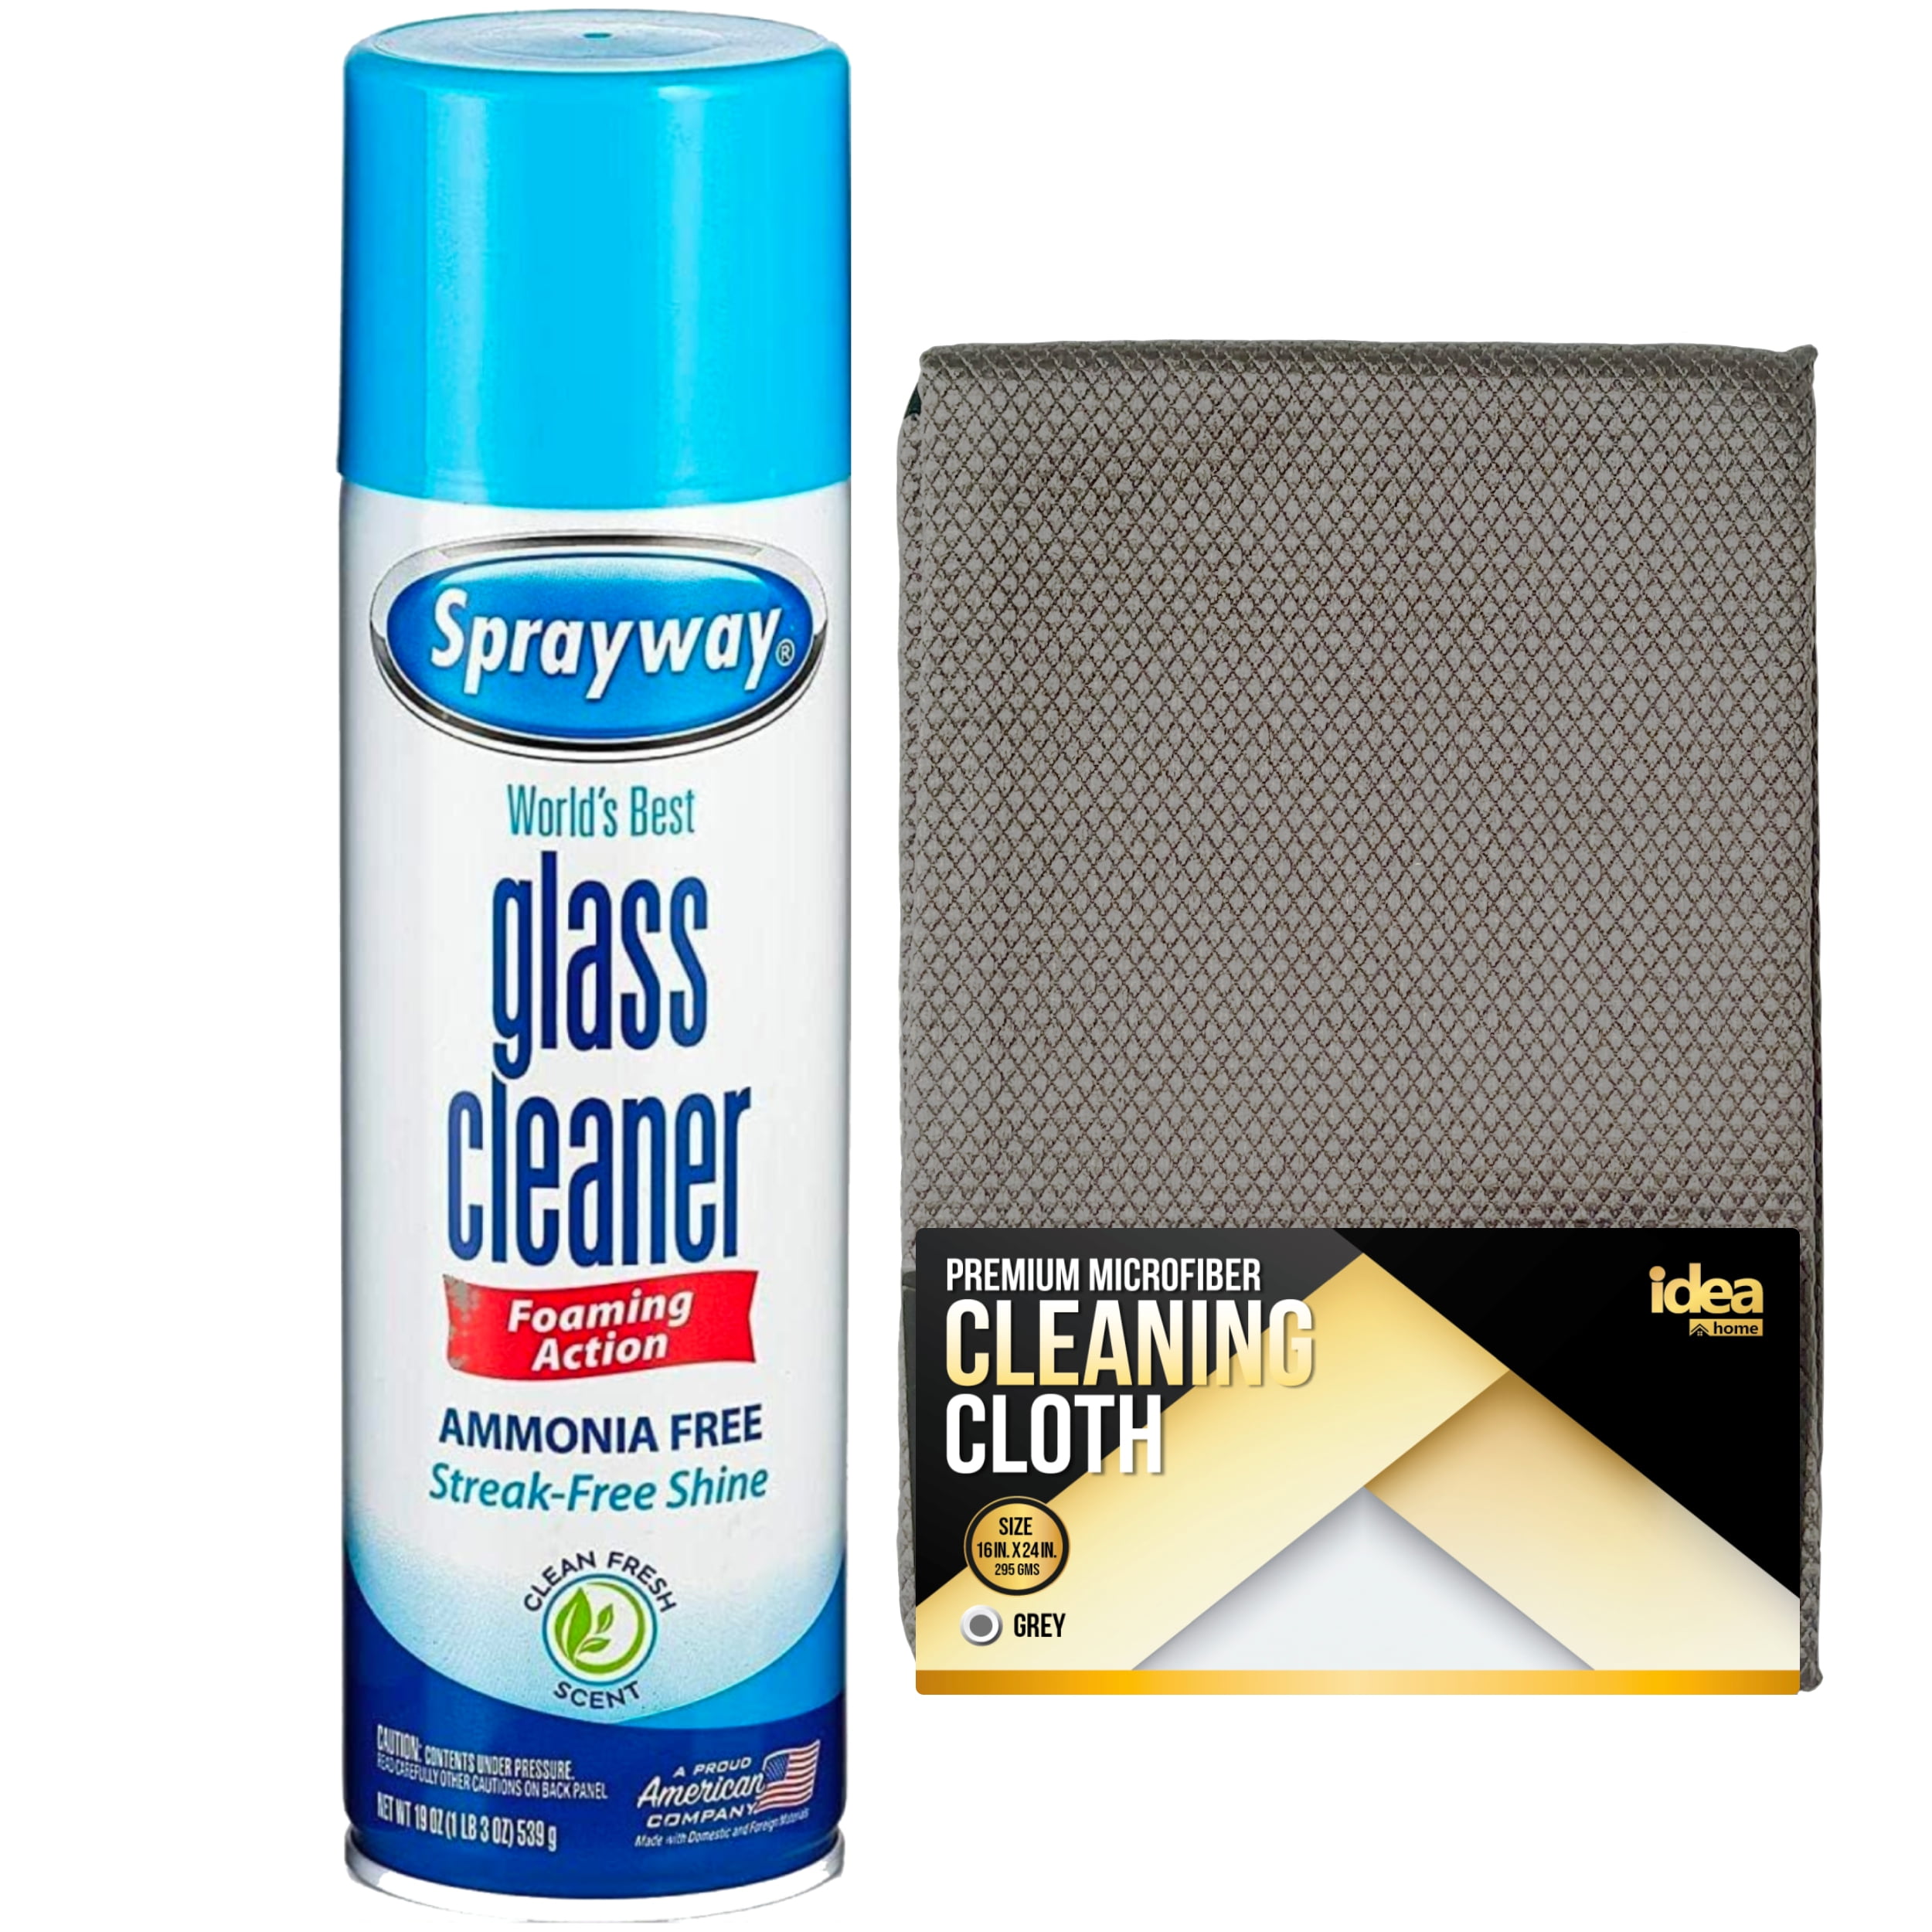 Sprayway Glass and Window Cleaner with Spray Foam Bundle with Idea Home  Premium Microfiber Cleaning Cloth Streak and Lint Free Large 16 x 24 in